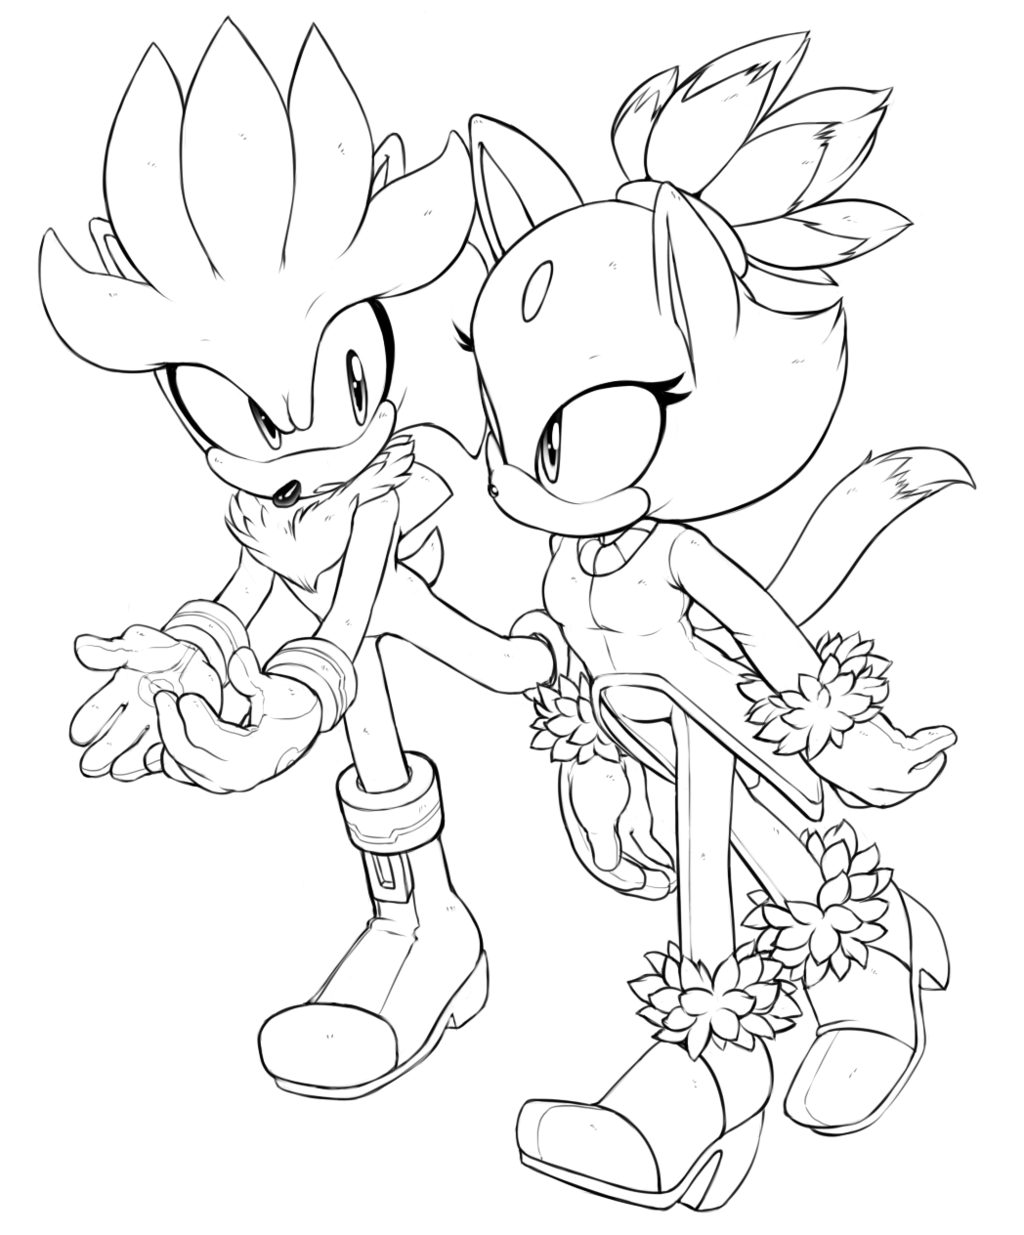 Blaze and Silver